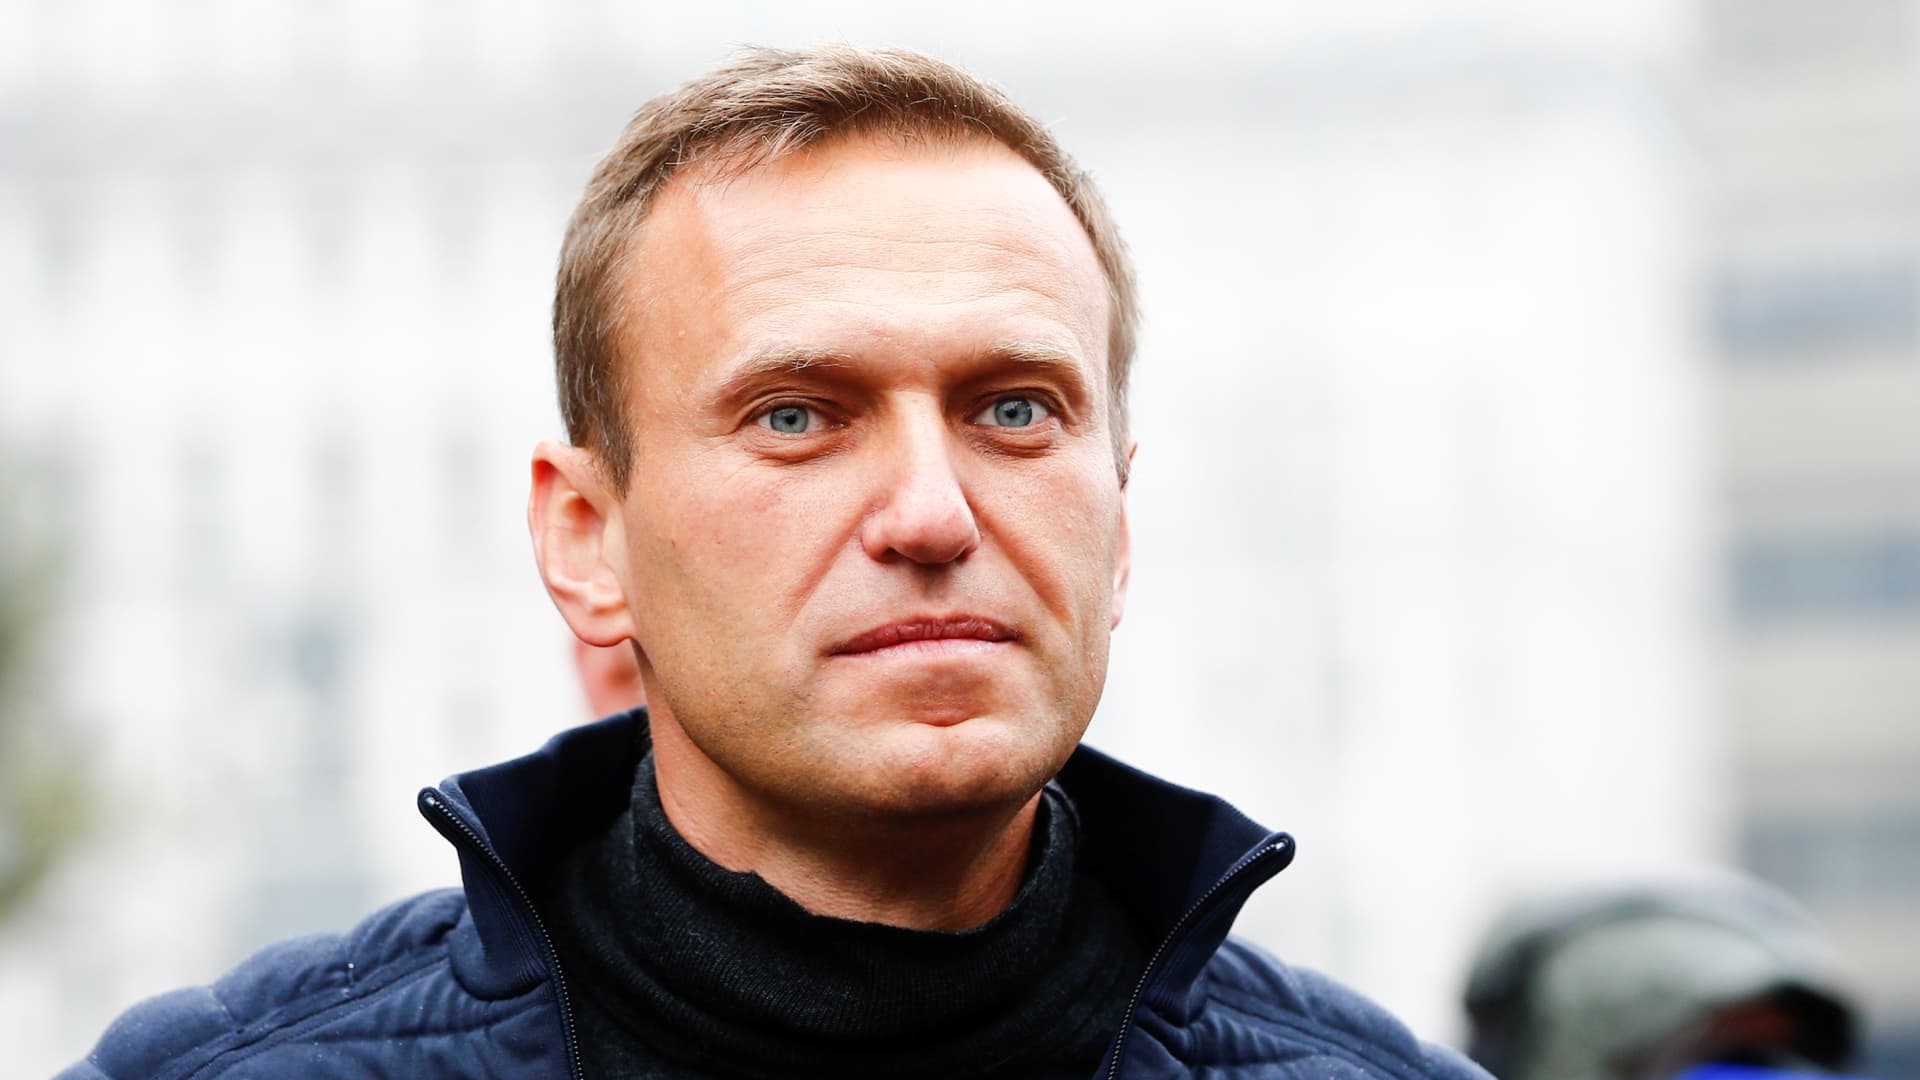 Russian opposition leader Alexei Navalny attends a rally in support of political prisoners in Prospekt Sakharova Street in Moscow, Russia on September 29, 2019. 